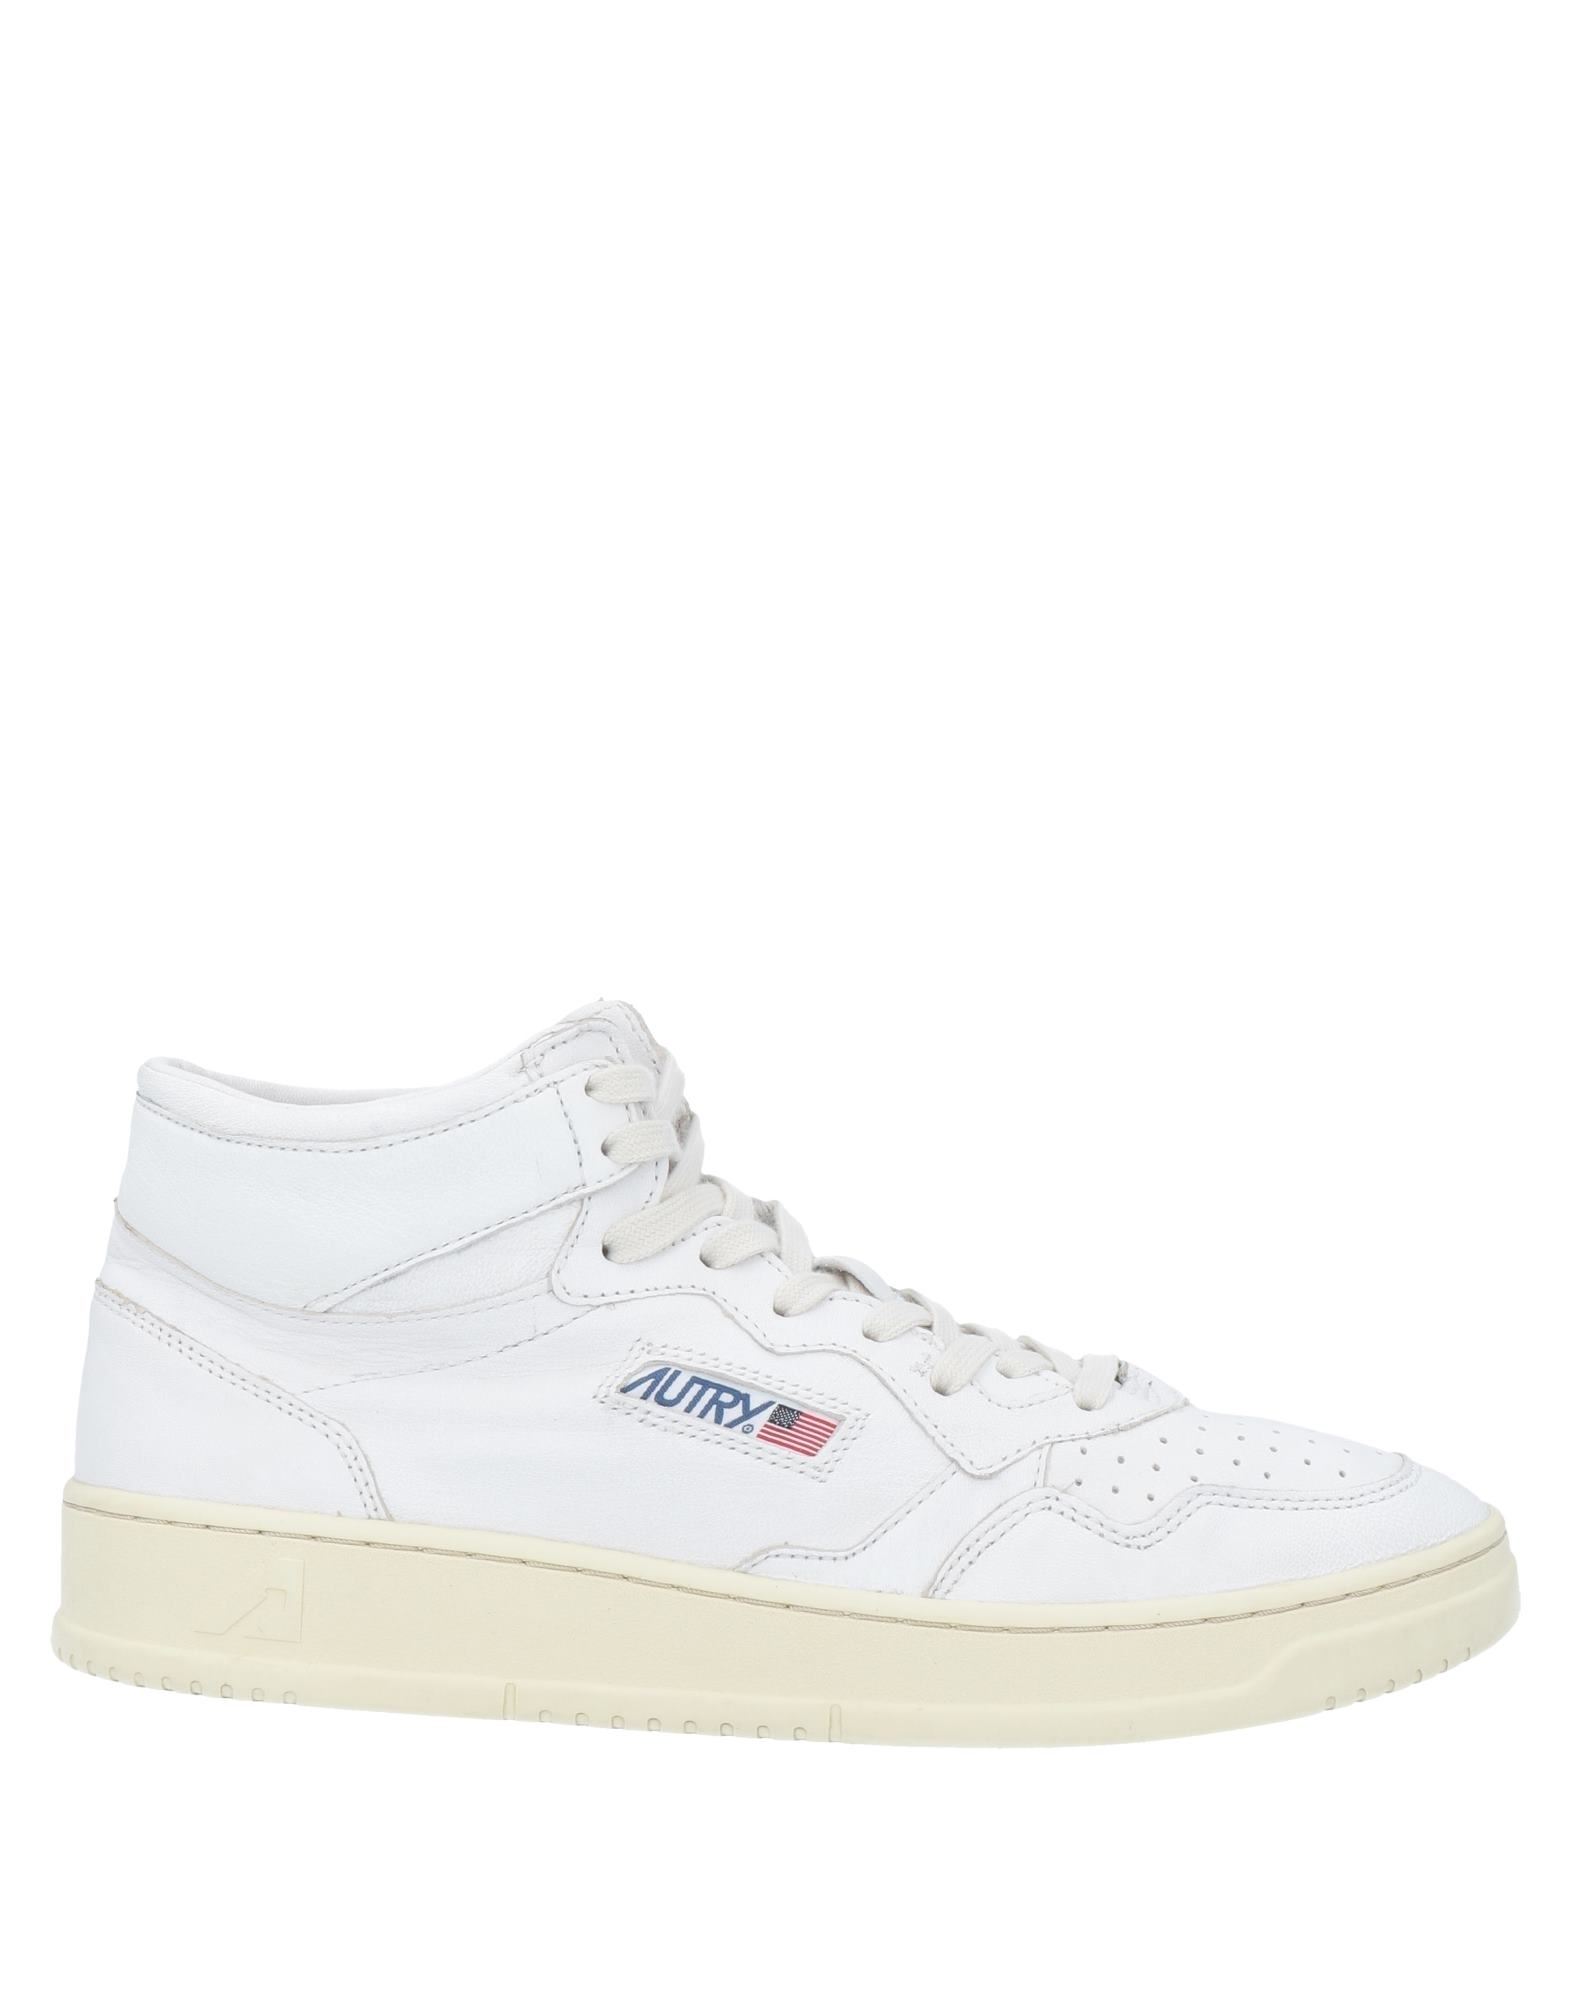 Shop Autry Woman Sneakers White Size 8 Goat Skin